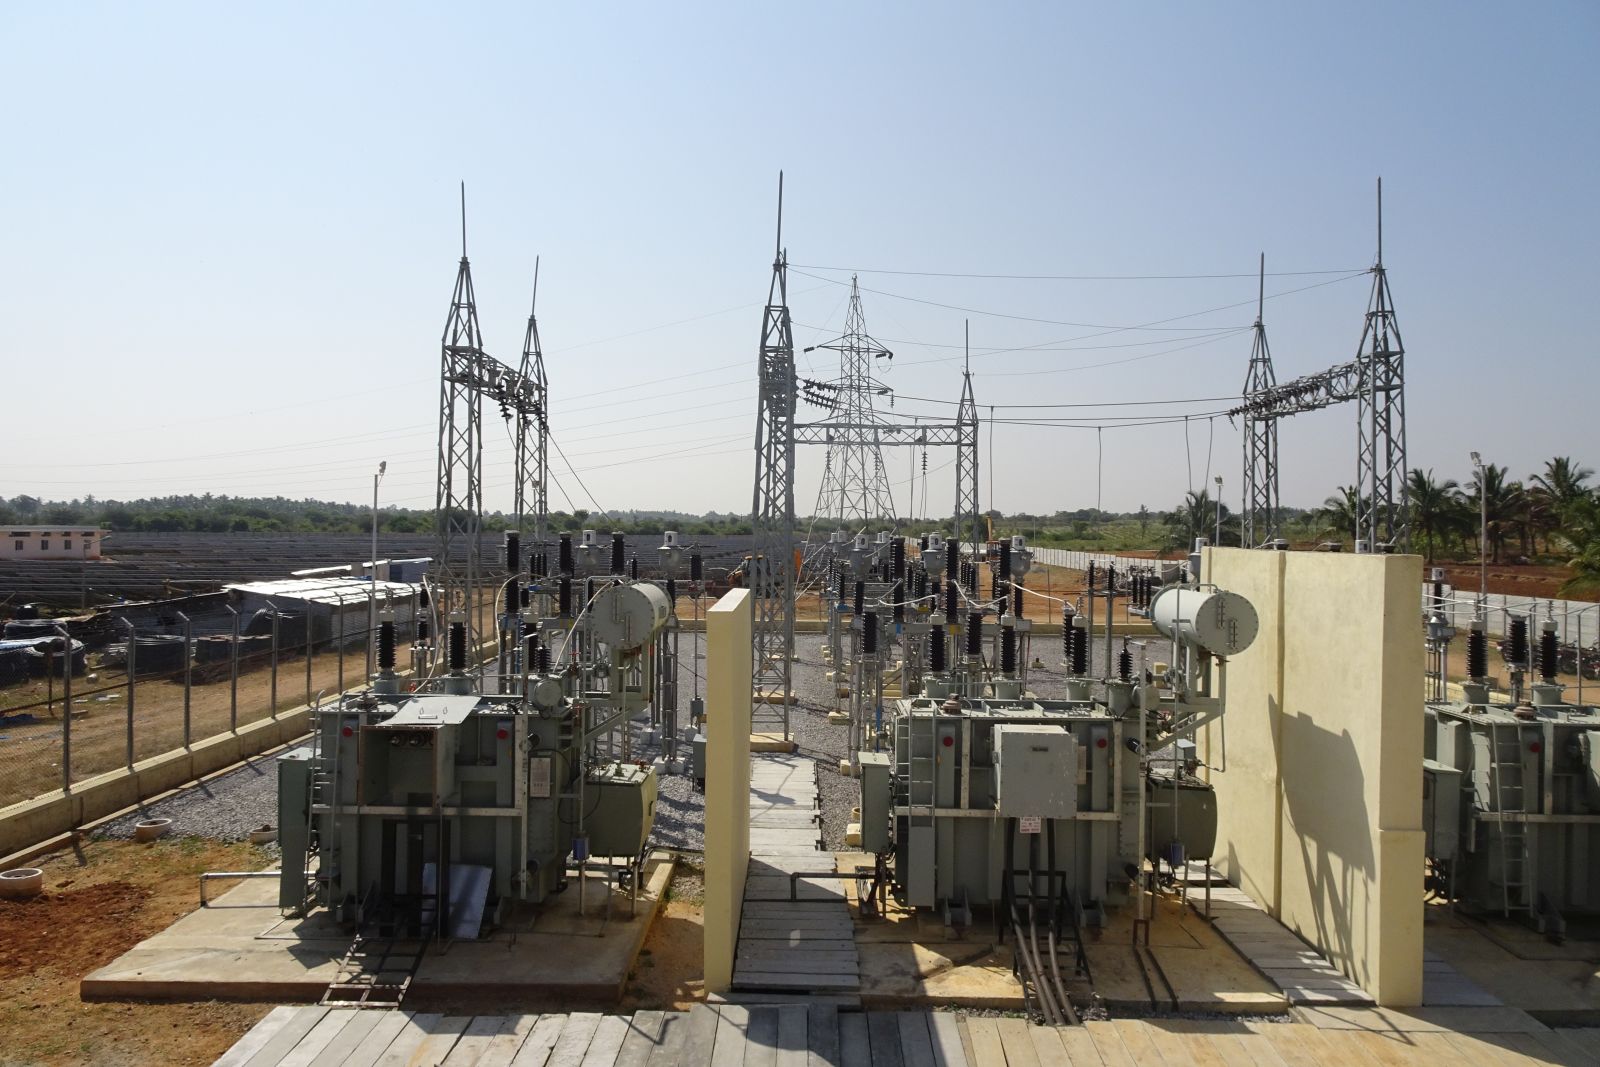 Electrical substation in Anantapur, India. Co-financed by KfW, it supplies electricity for the state of Andhra Pradesh.